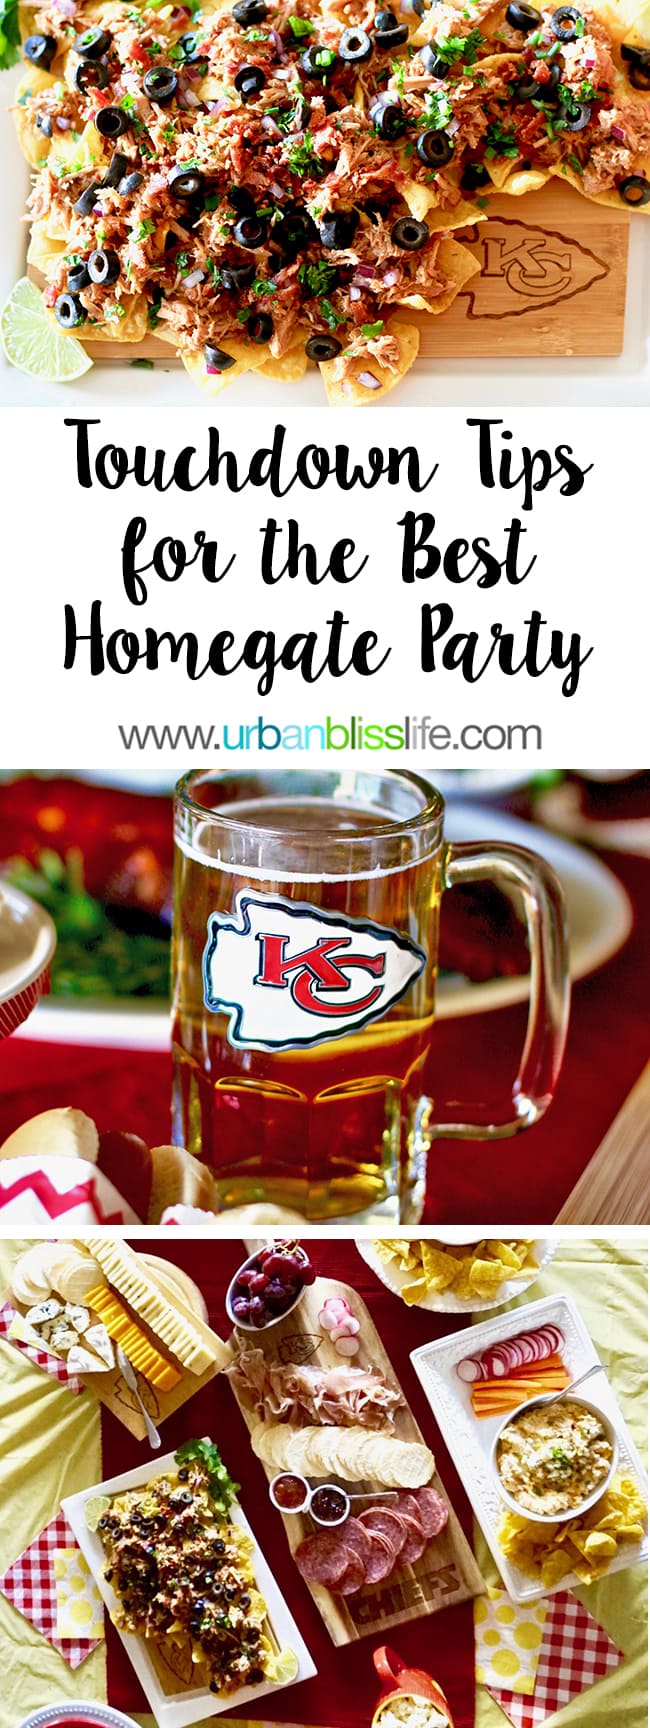 NFL Homegate Party tips